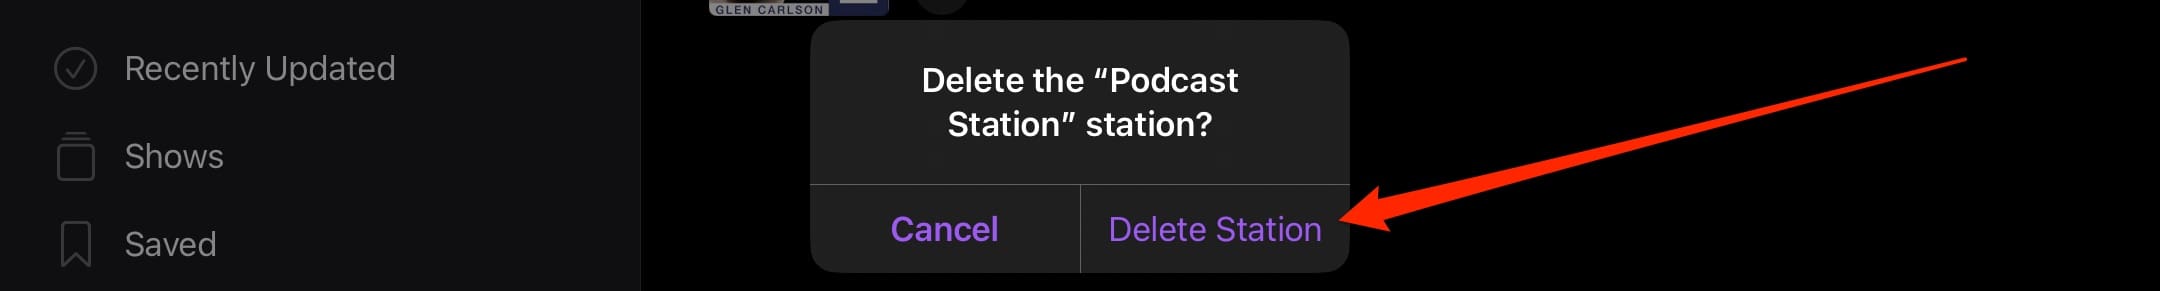 Delete Podcast Station in Apple Podcasts Screenshot